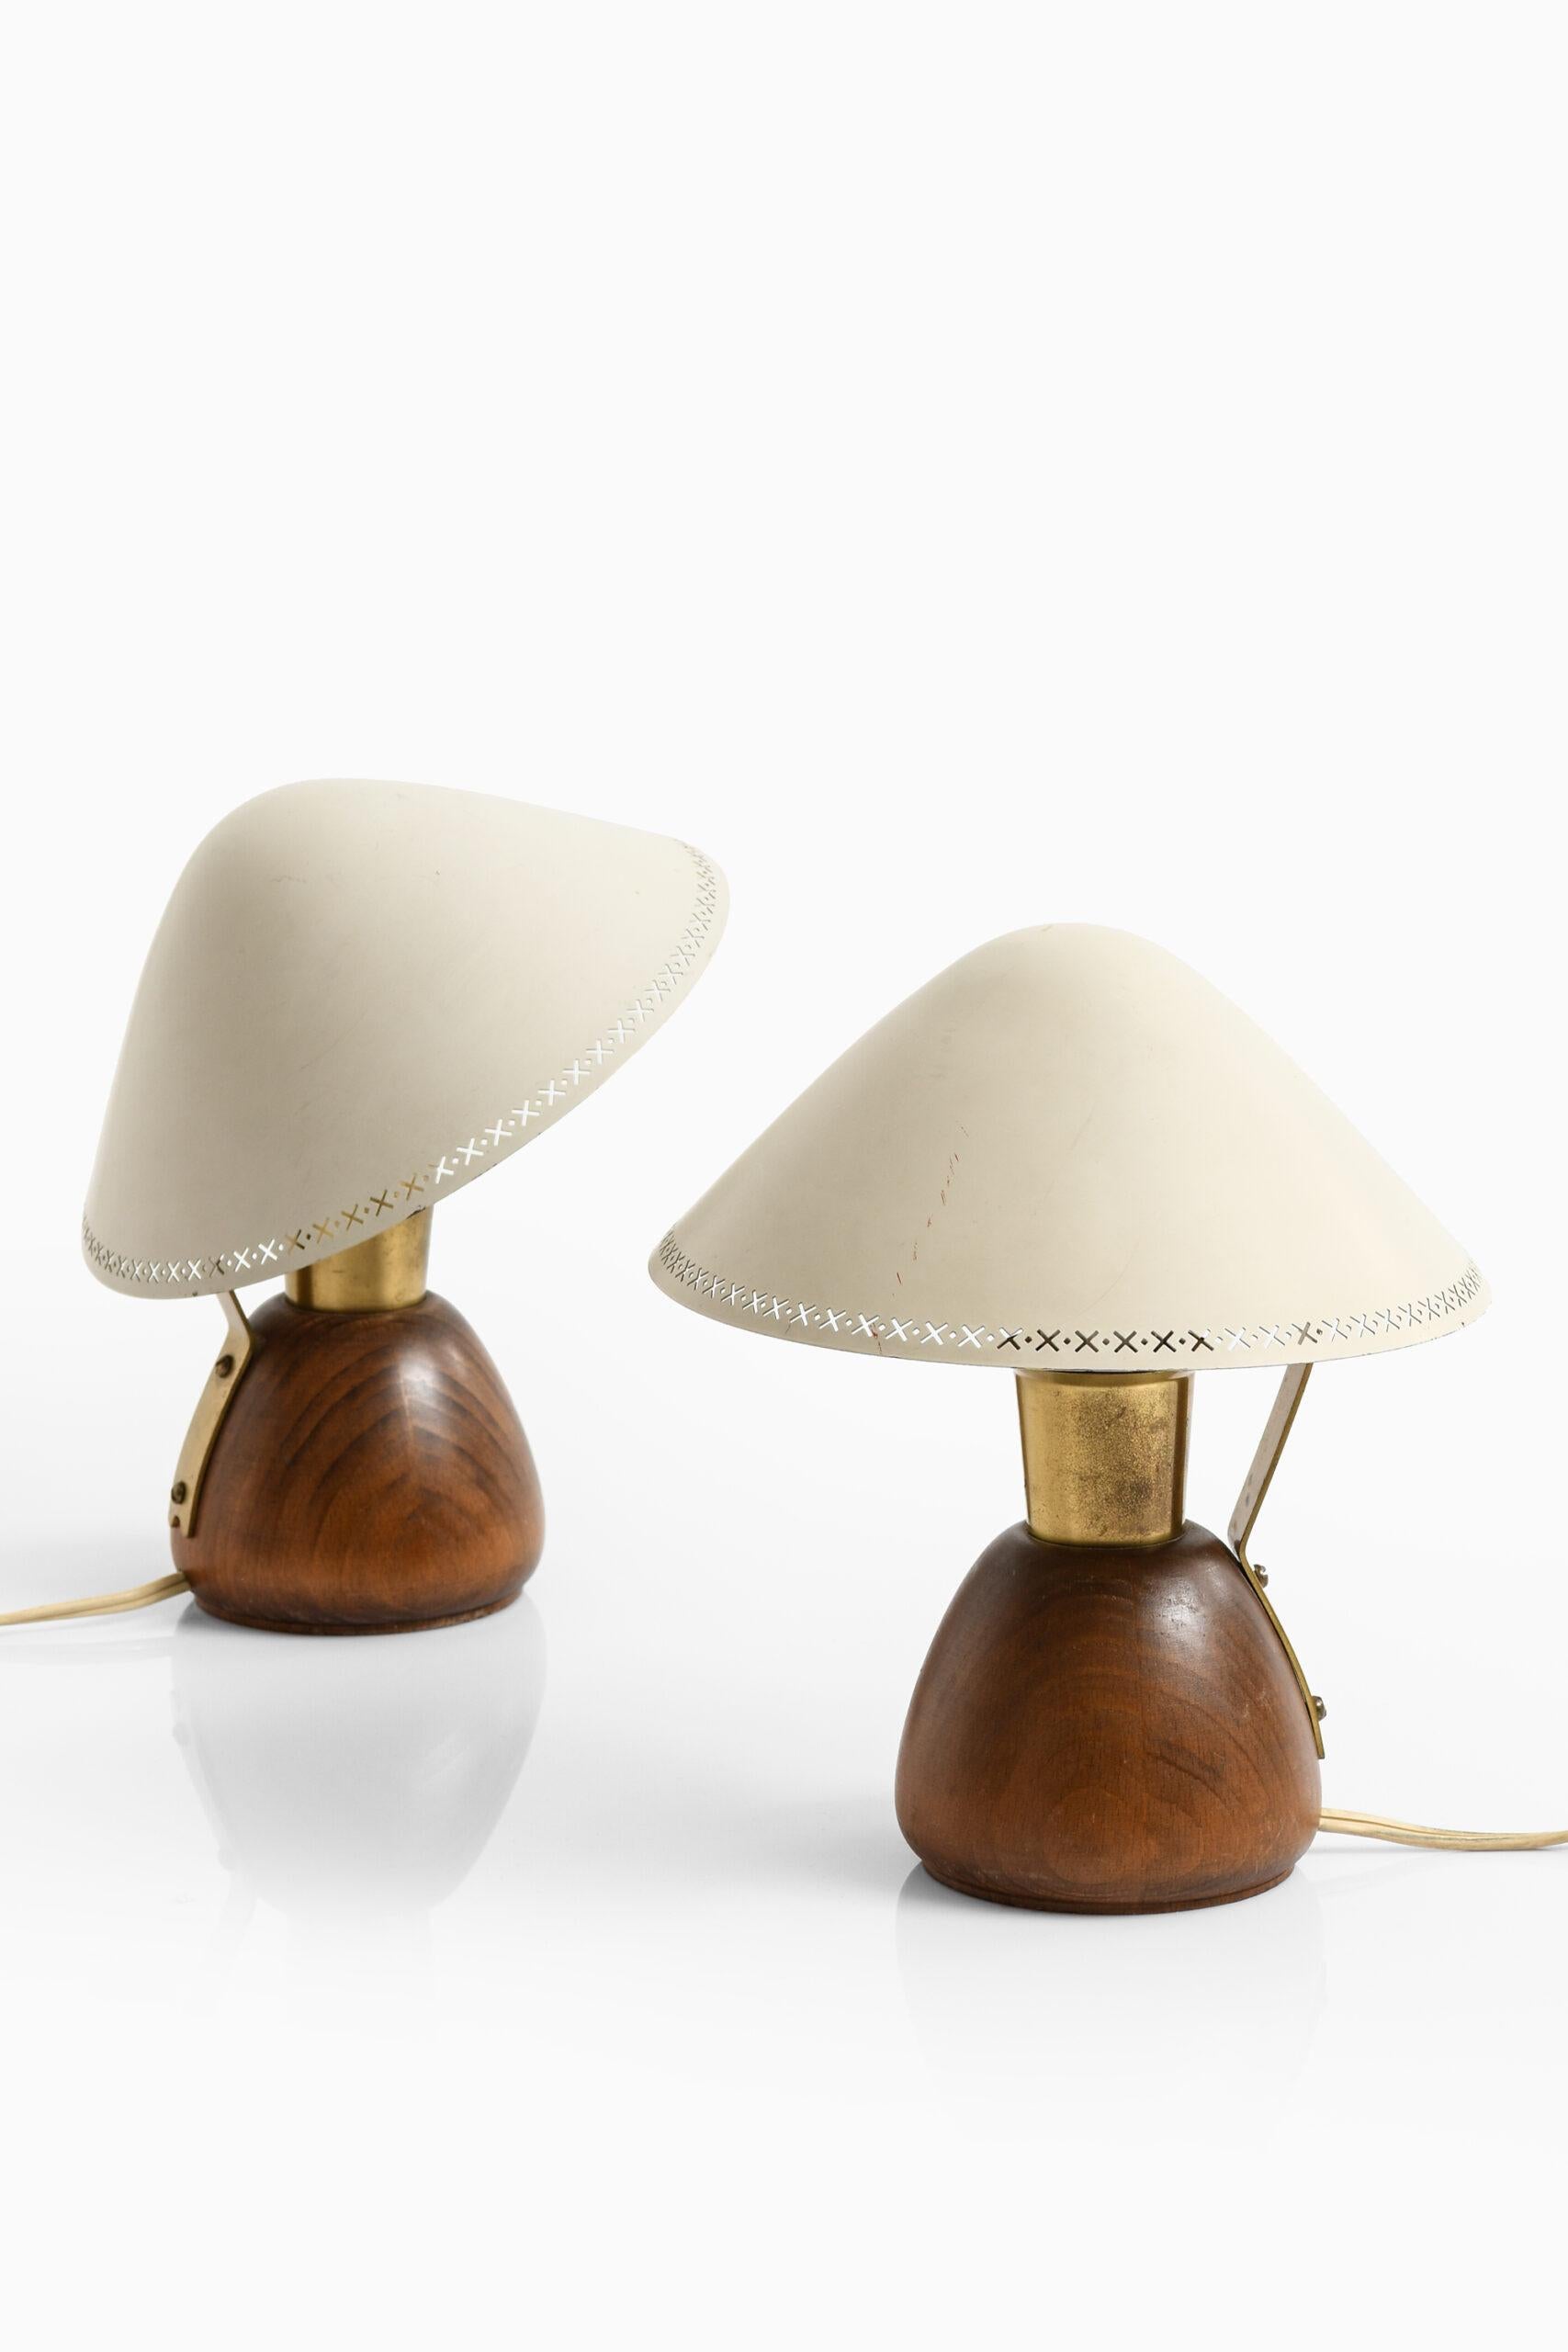 Metal Table Lamps Produced by ASEA in Sweden